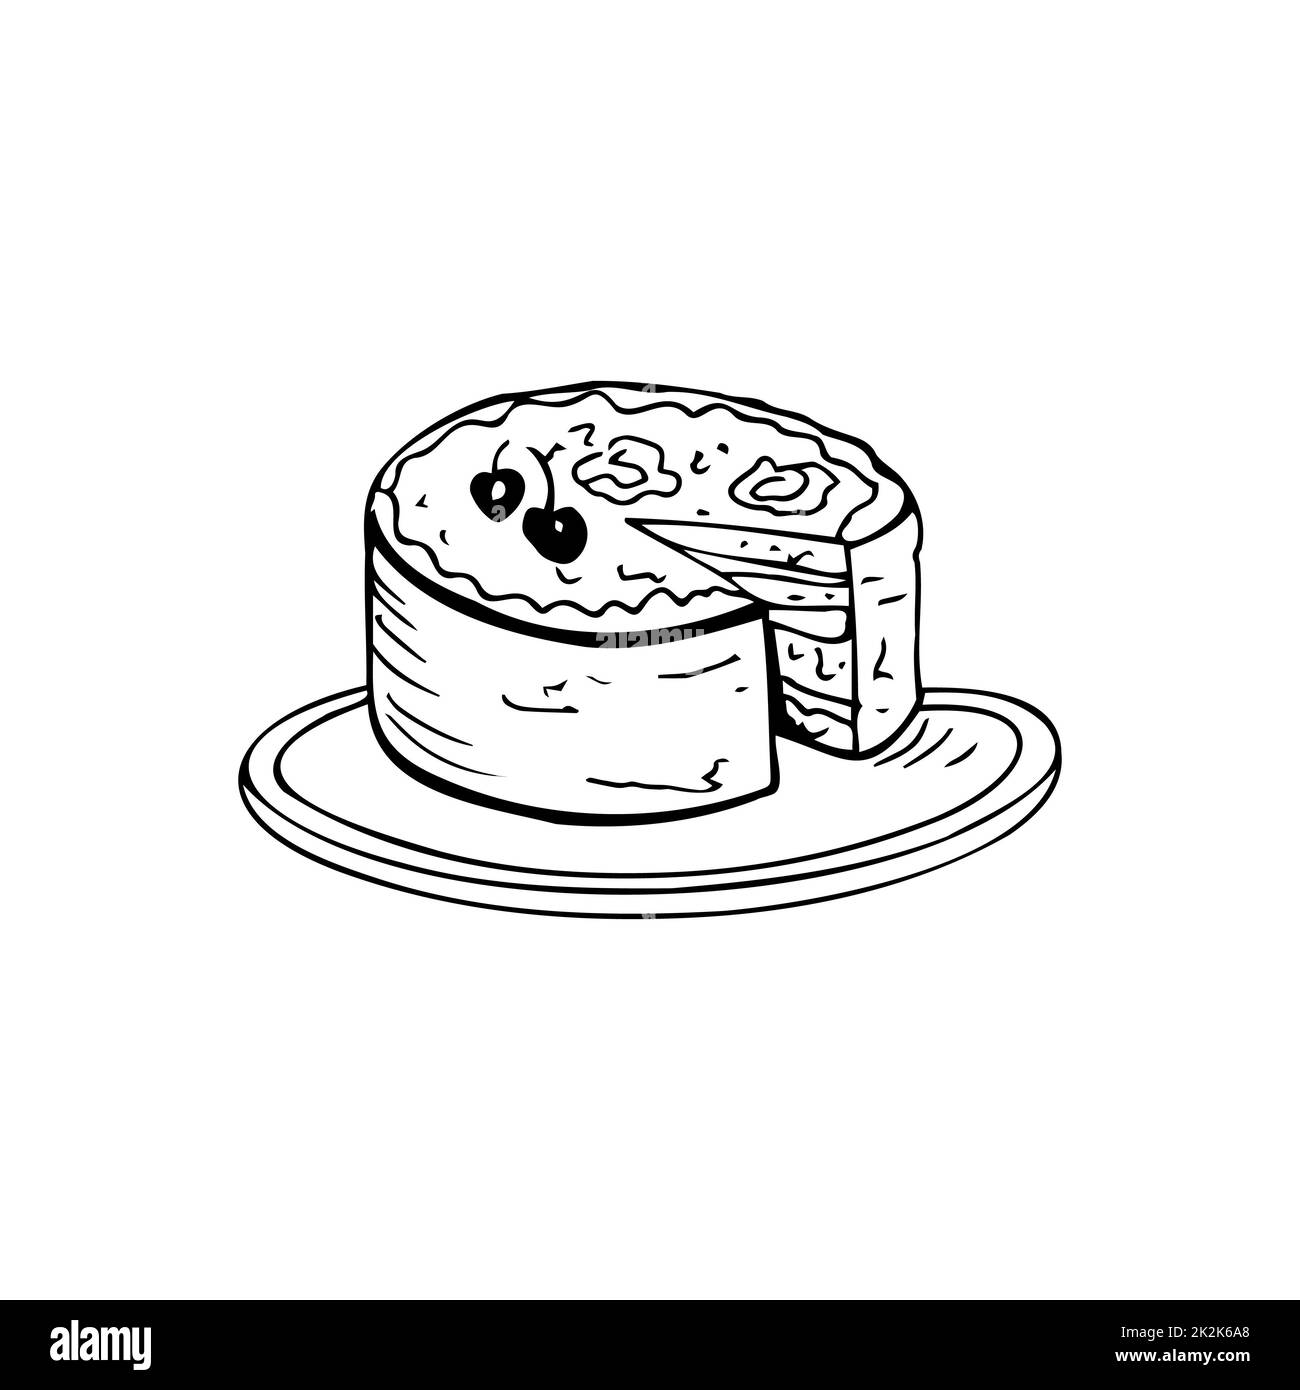 Big cake thin black lines on a white background - Vector Stock Photo